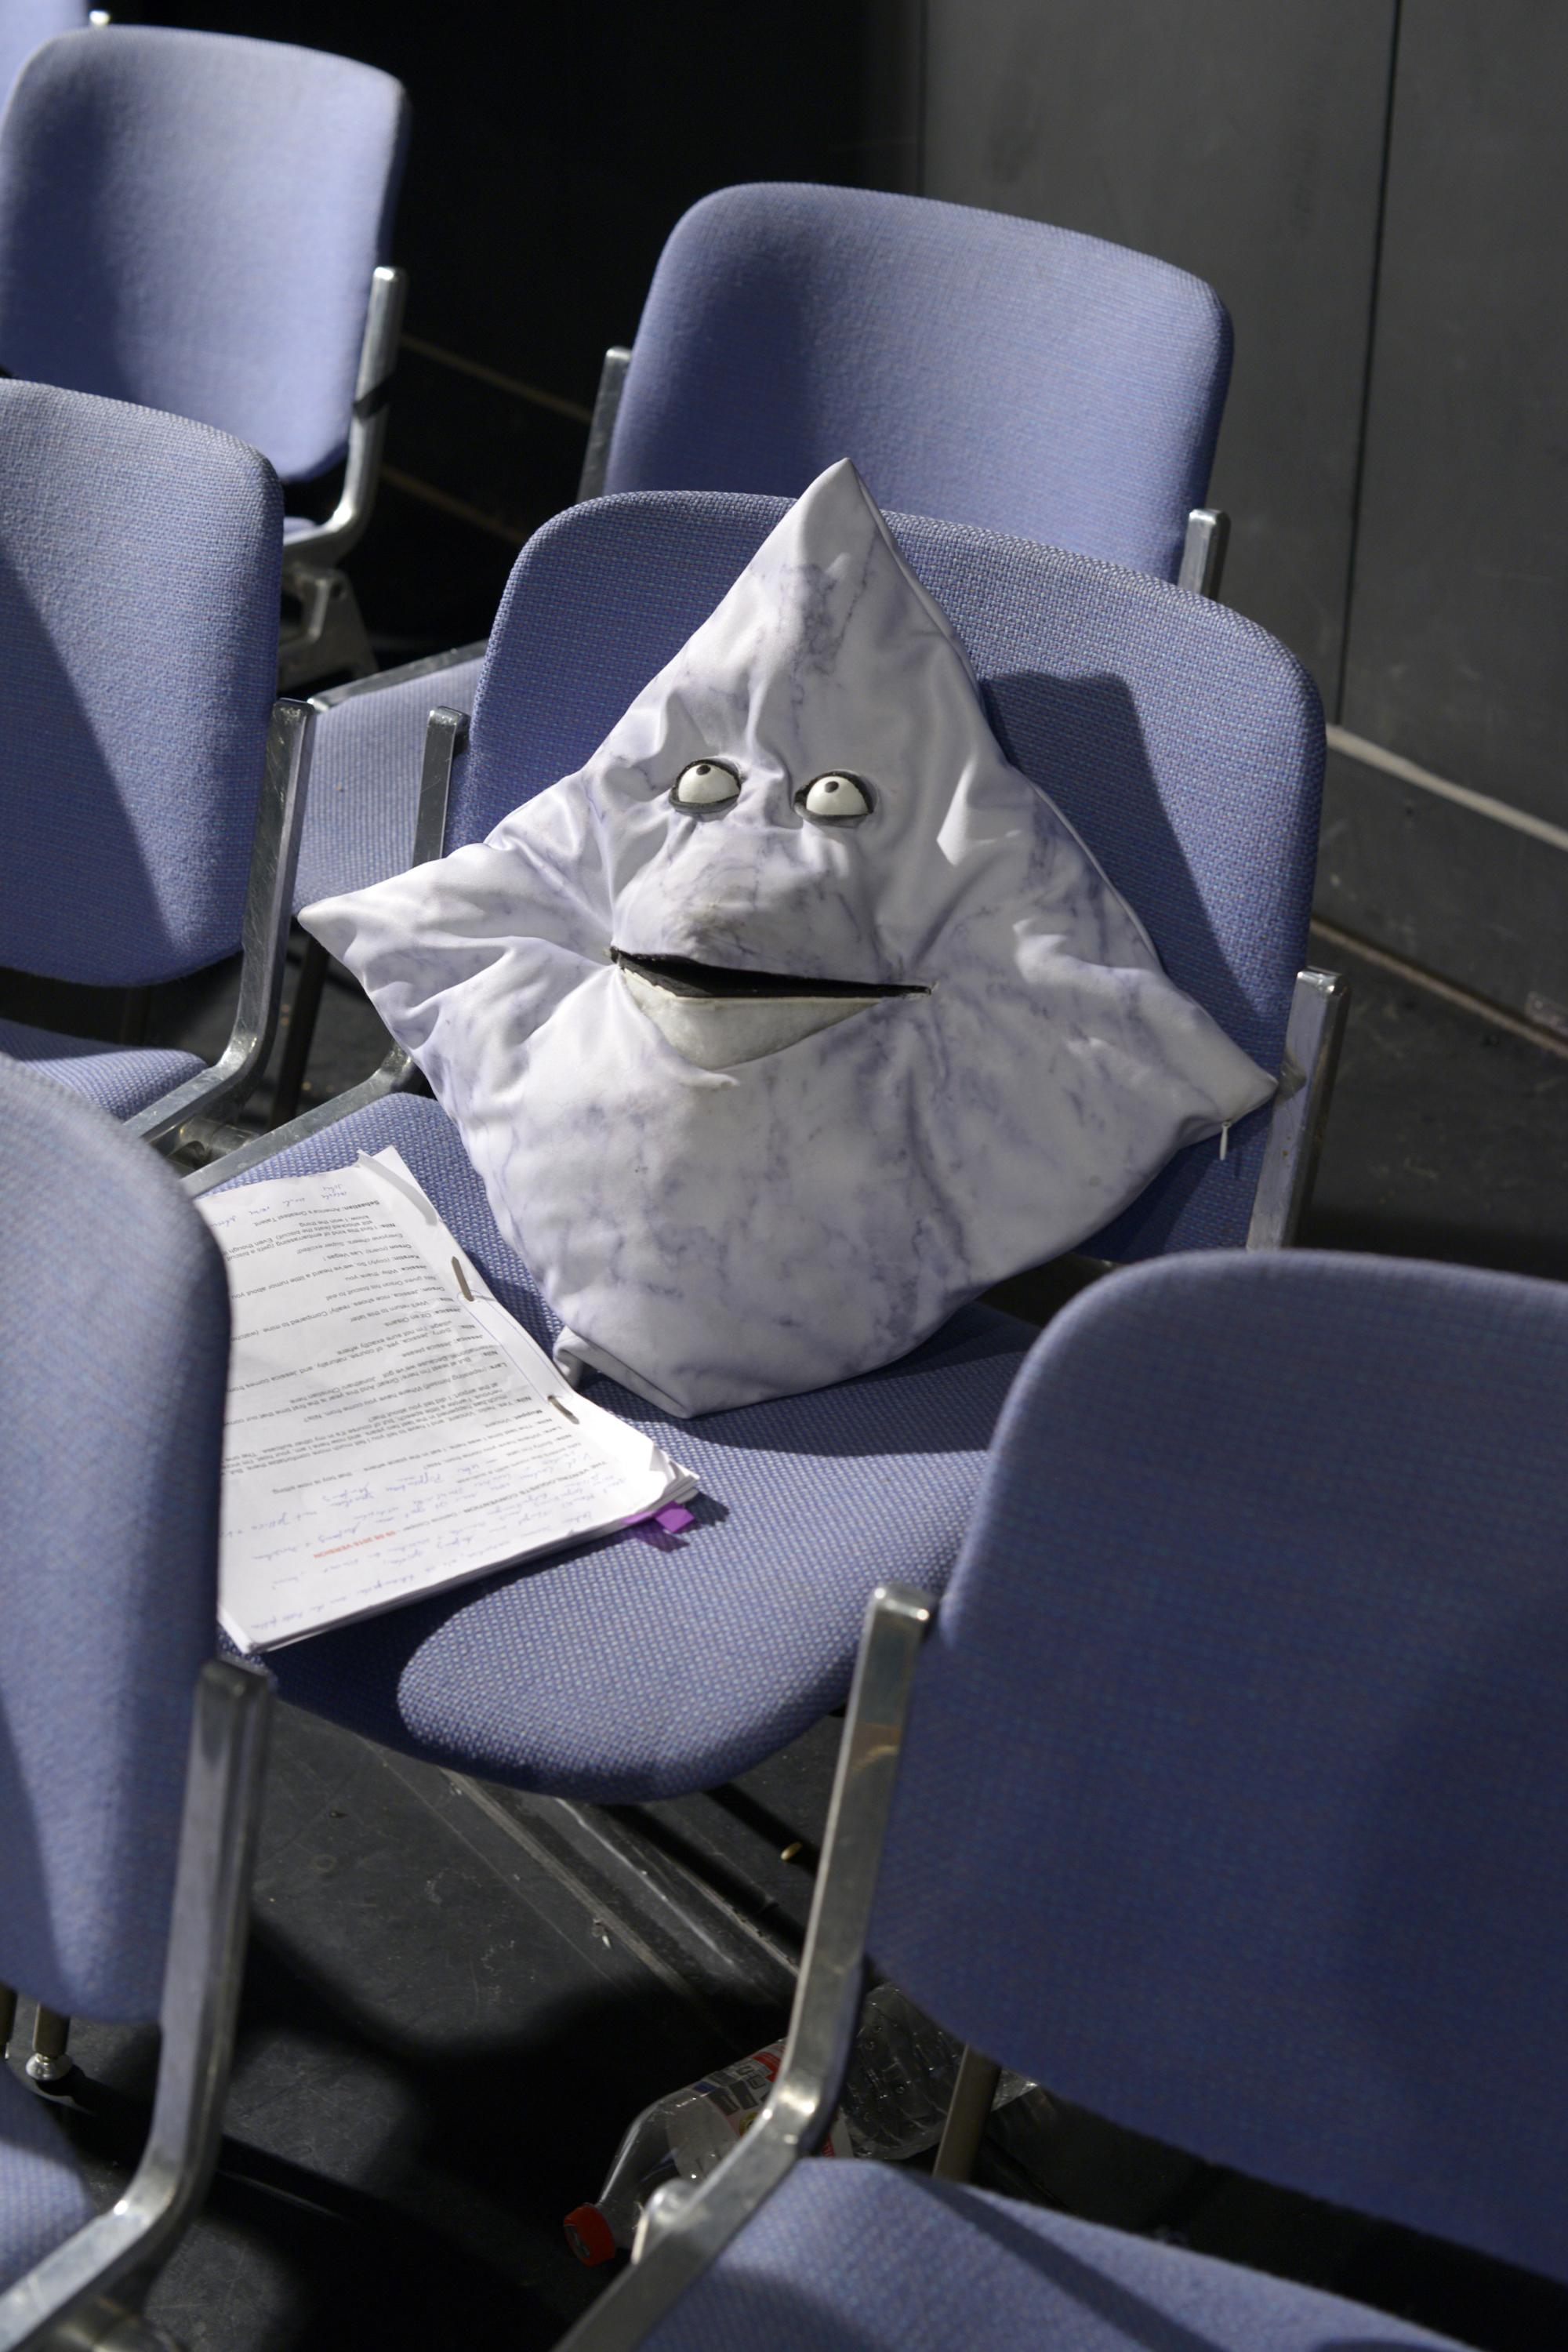 In a row of chairs, a pillow modified with a mouth and bulging eyes sits next to a stack of papers.